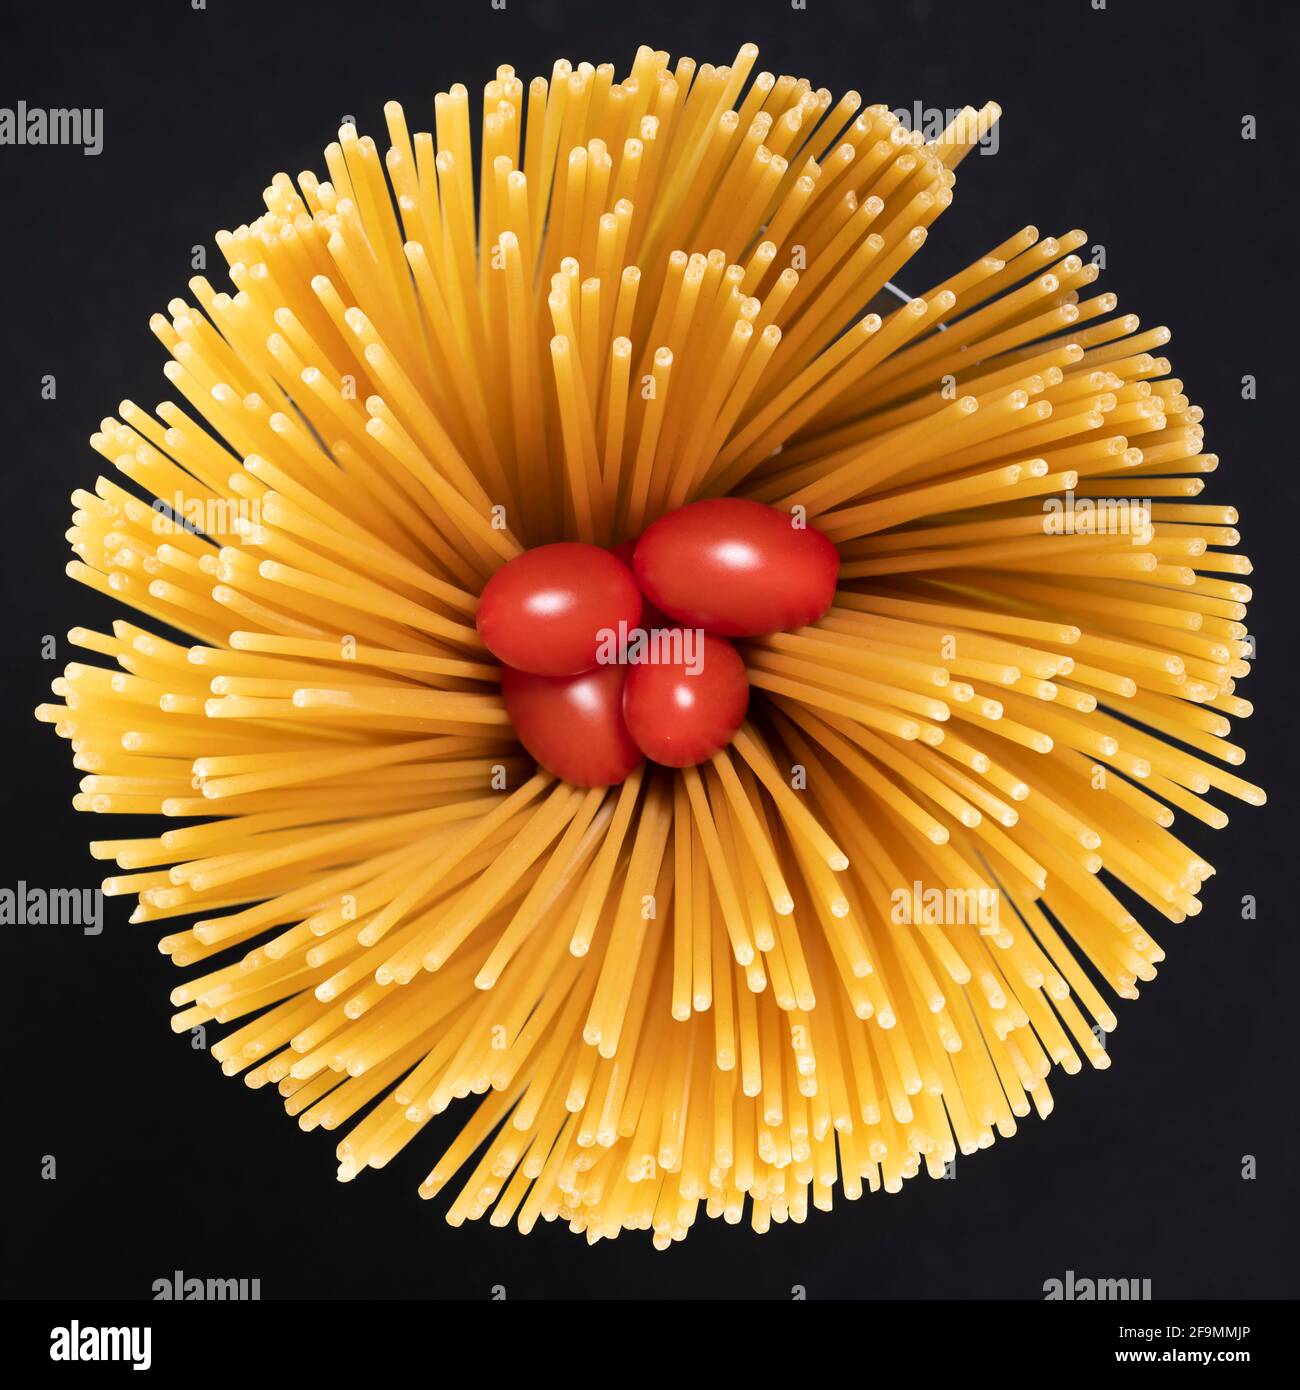 Abstract image of spaghetti and tomato, view from above Stock Photo